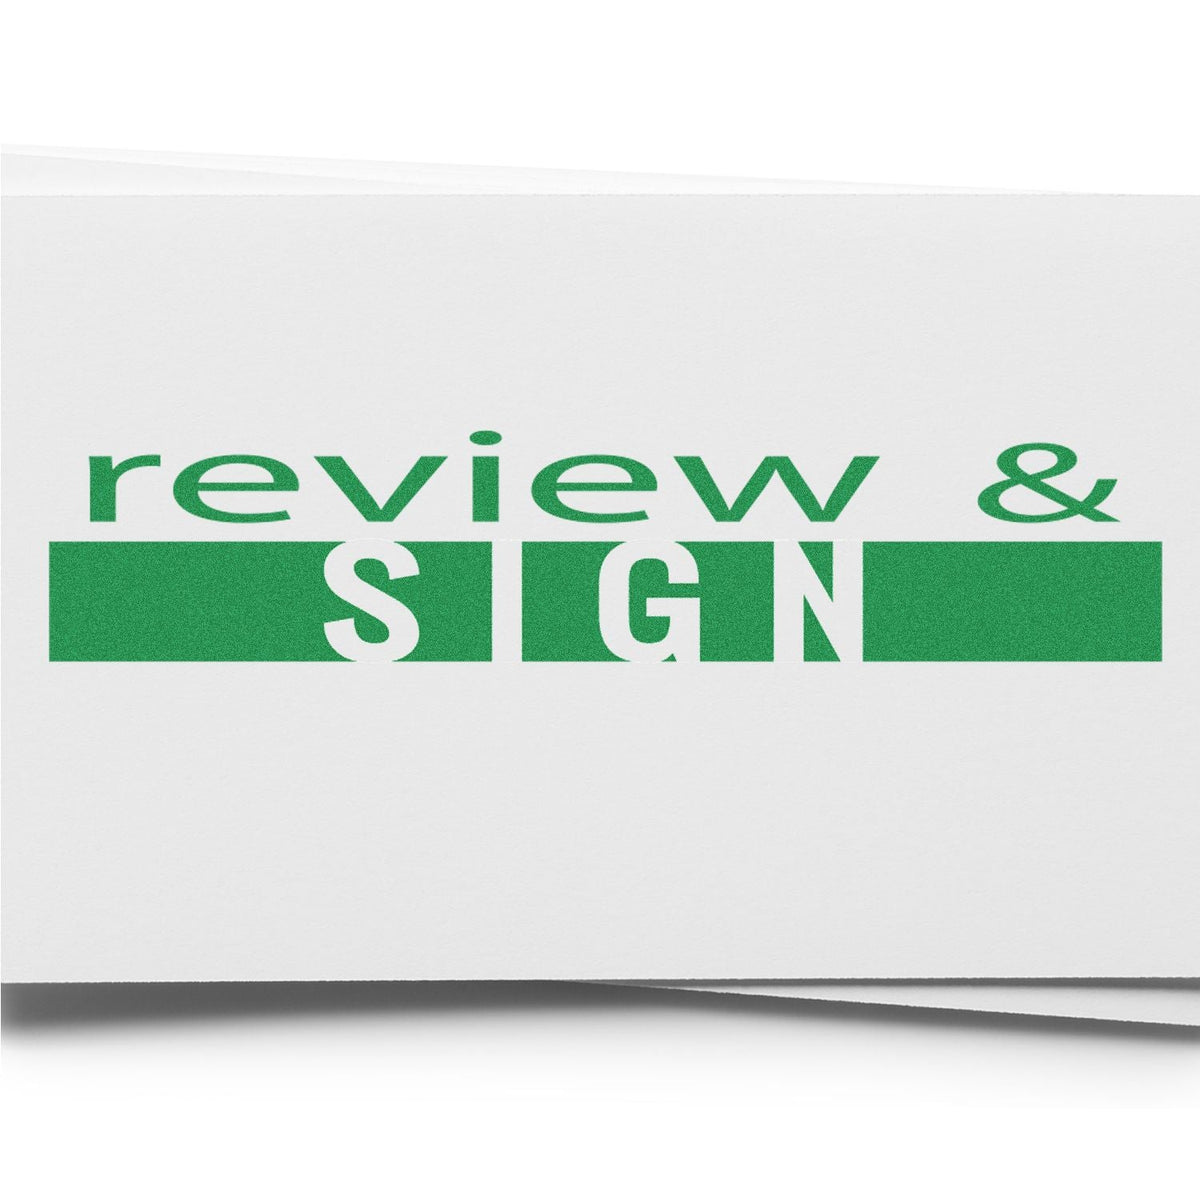 Self-Inking Review and Sign Stamp In Use